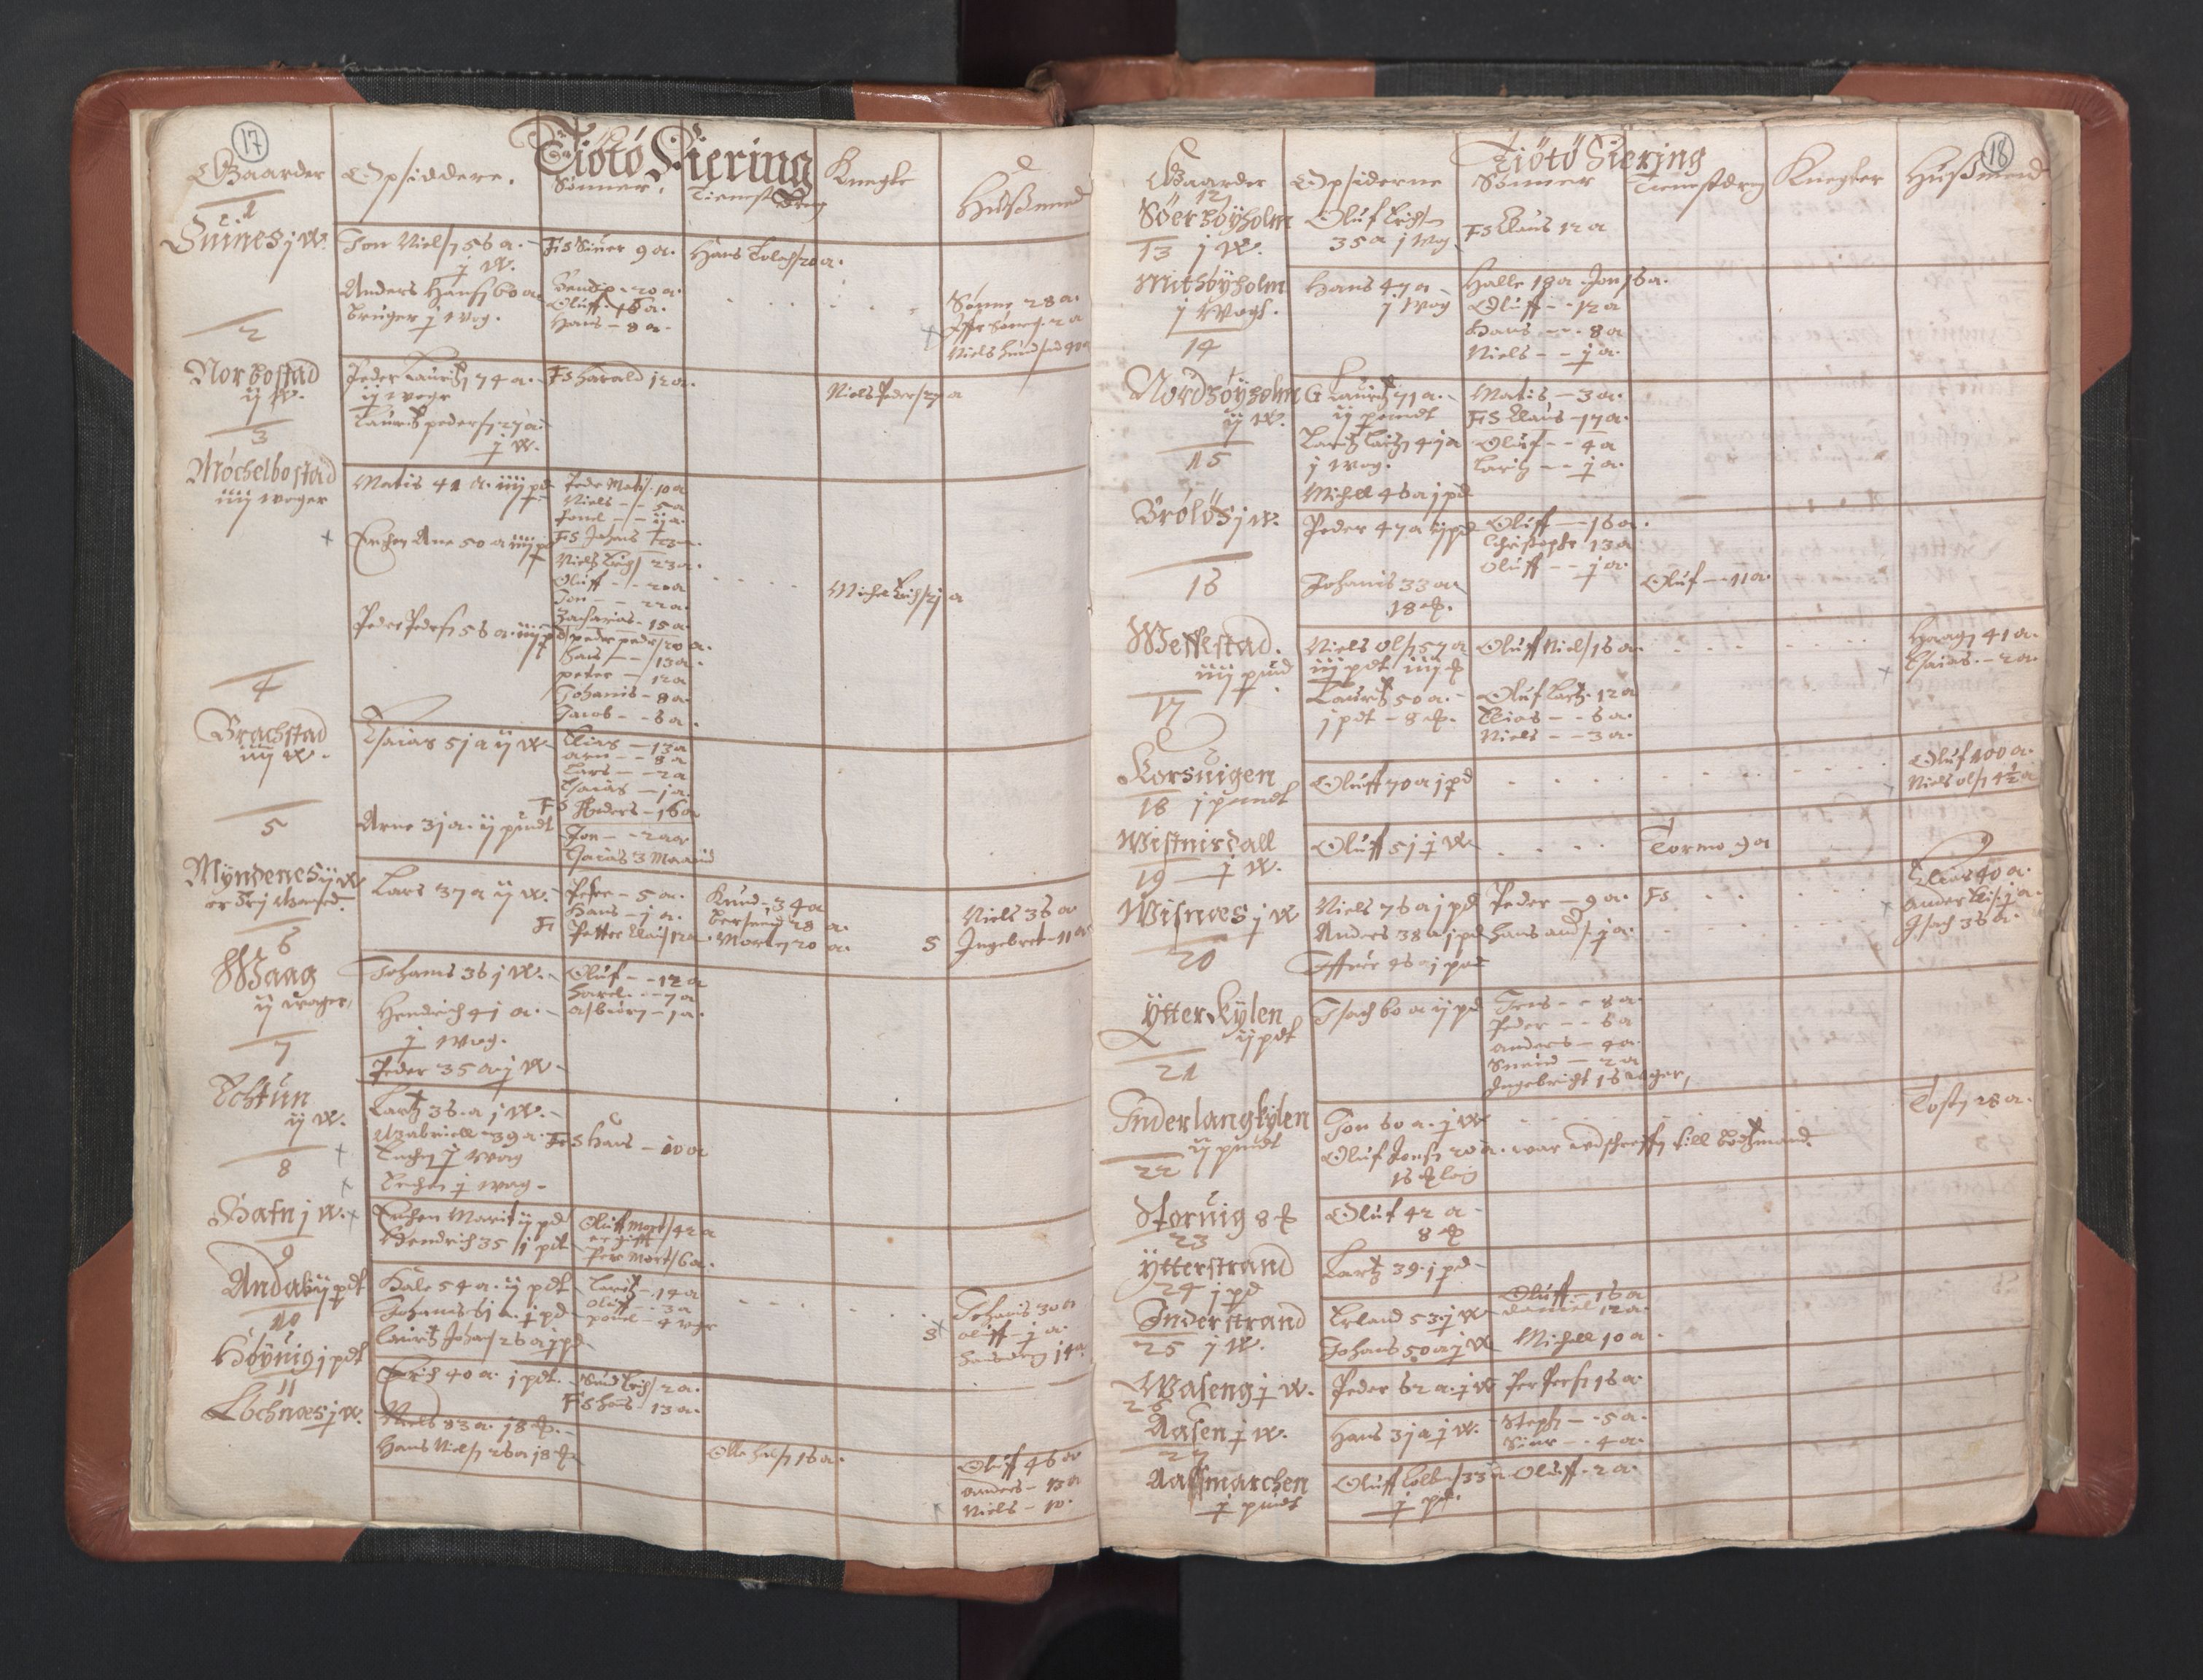 RA, Vicar's Census 1664-1666, no. 35: Helgeland deanery and Salten deanery, 1664-1666, p. 17-18